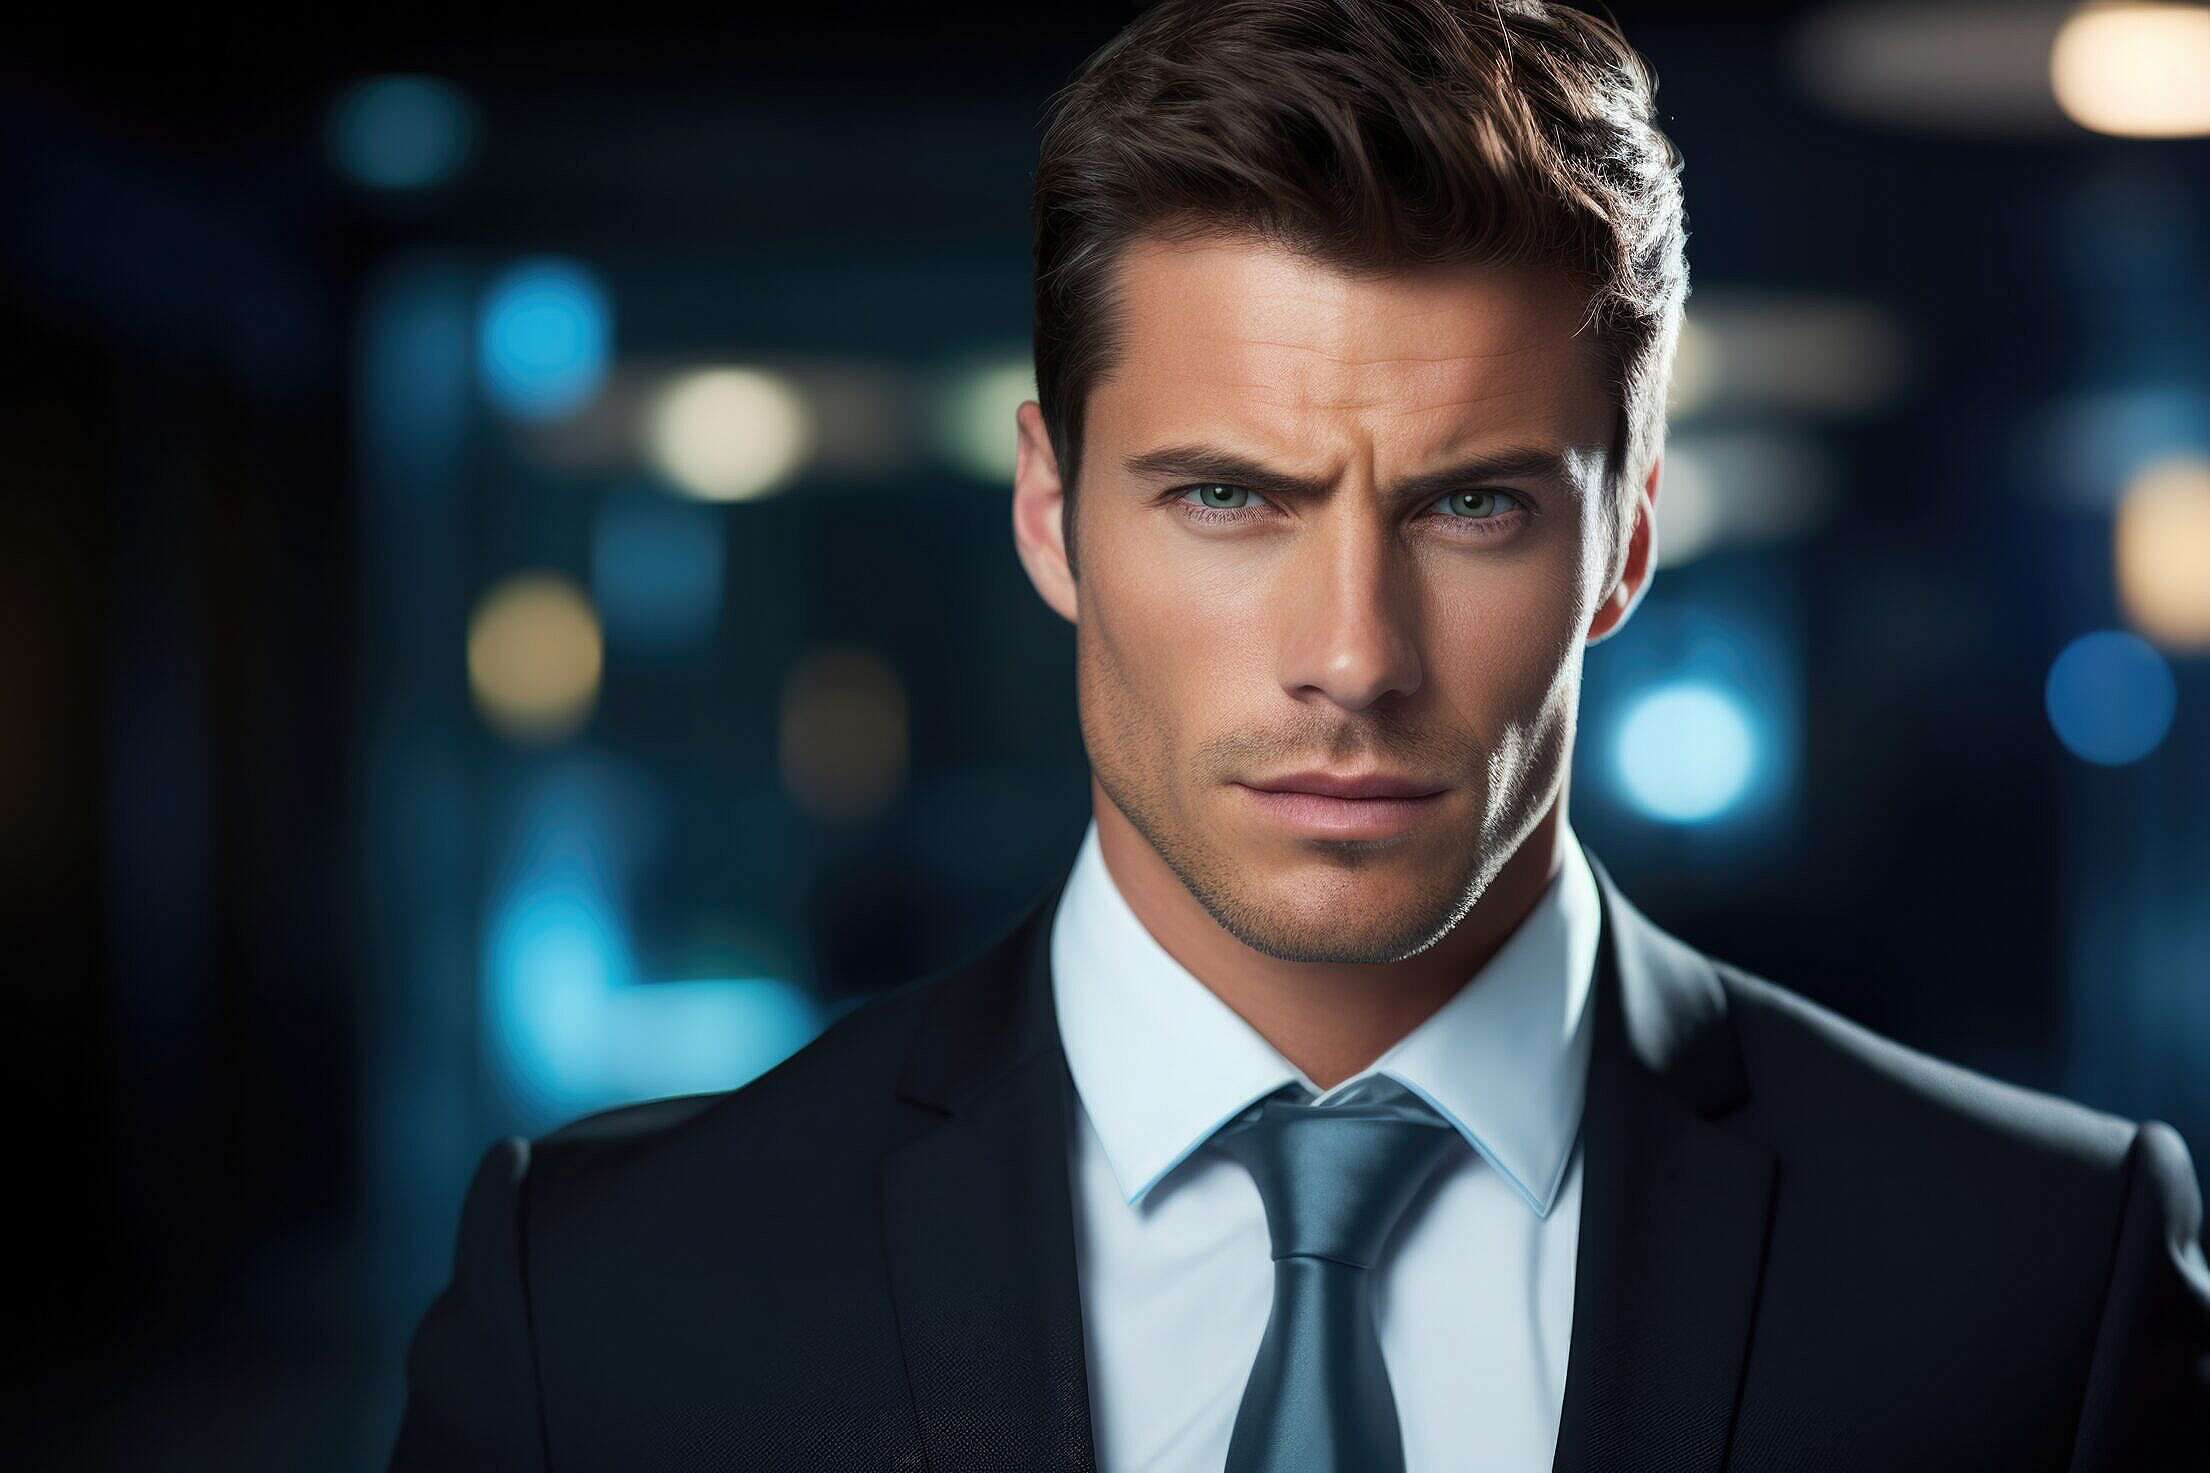 Young Handsome Business Man Suits Portrait Free Stock Photo | picjumbo